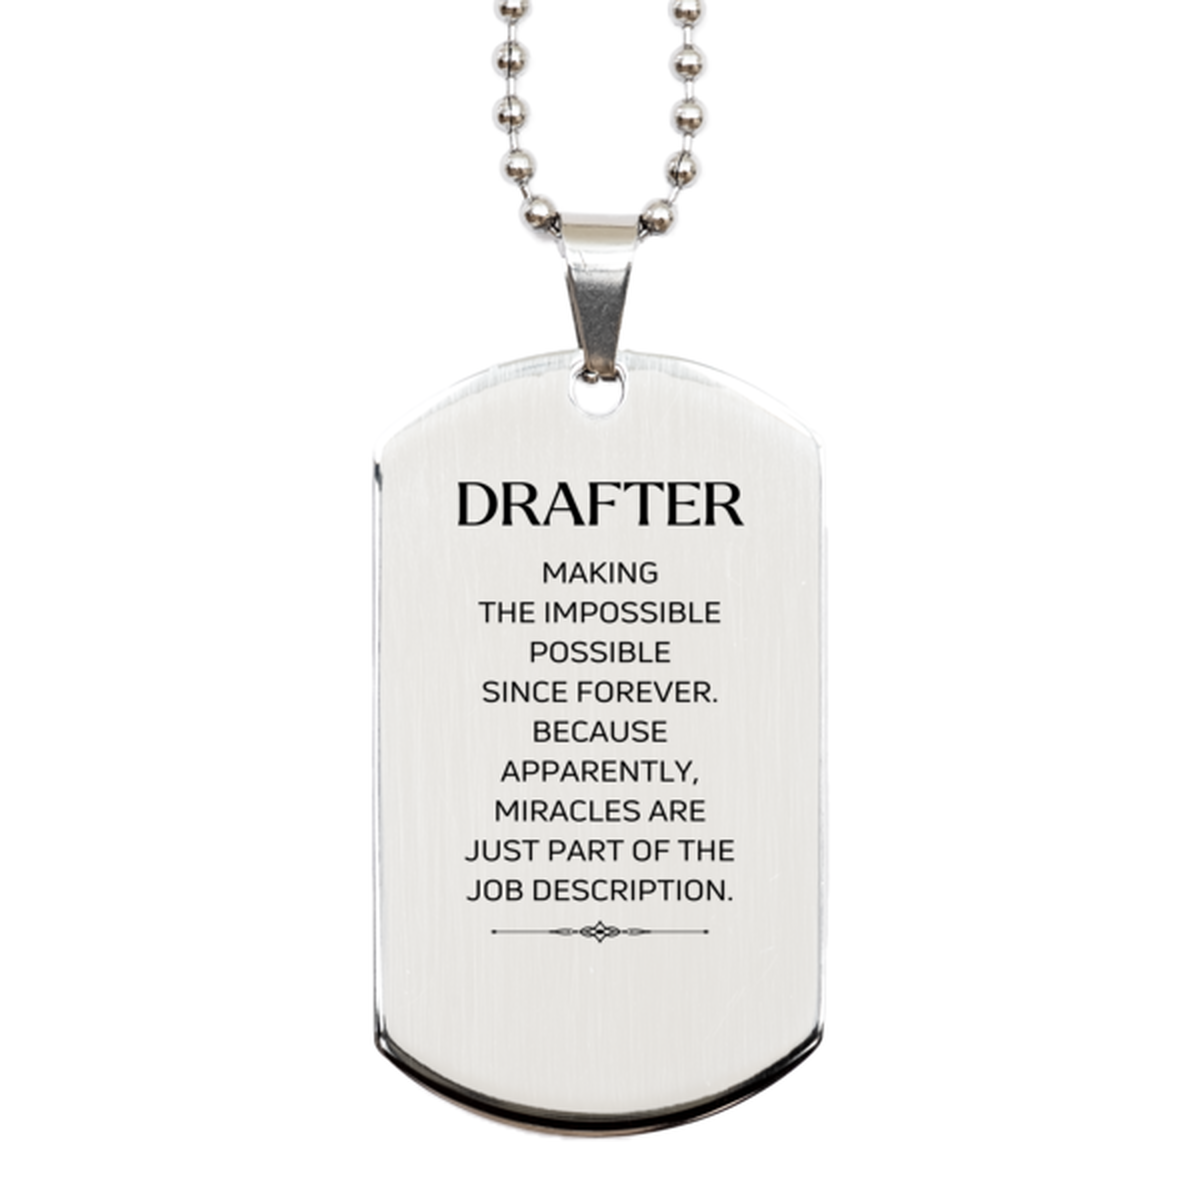 Funny Drafter Gifts, Miracles are just part of the job description, Inspirational Birthday Silver Dog Tag For Drafter, Men, Women, Coworkers, Friends, Boss